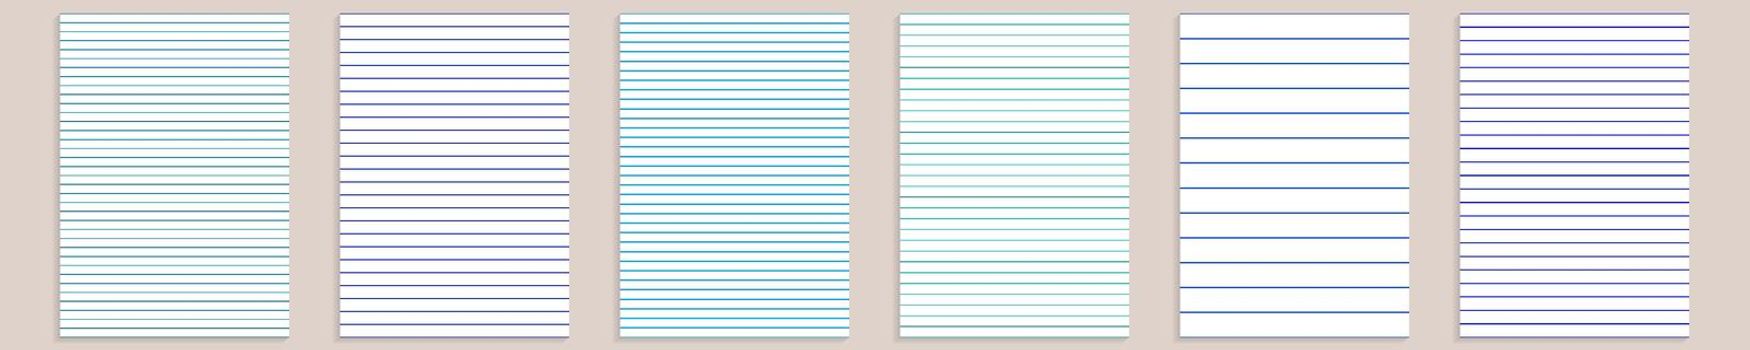 Grid paper set. Abstract striped background with color graph. Geometric pattern for school, wallpaper, textures, notebook. Lined blank A4 isolated on transparent background. Millimeter graph grid.